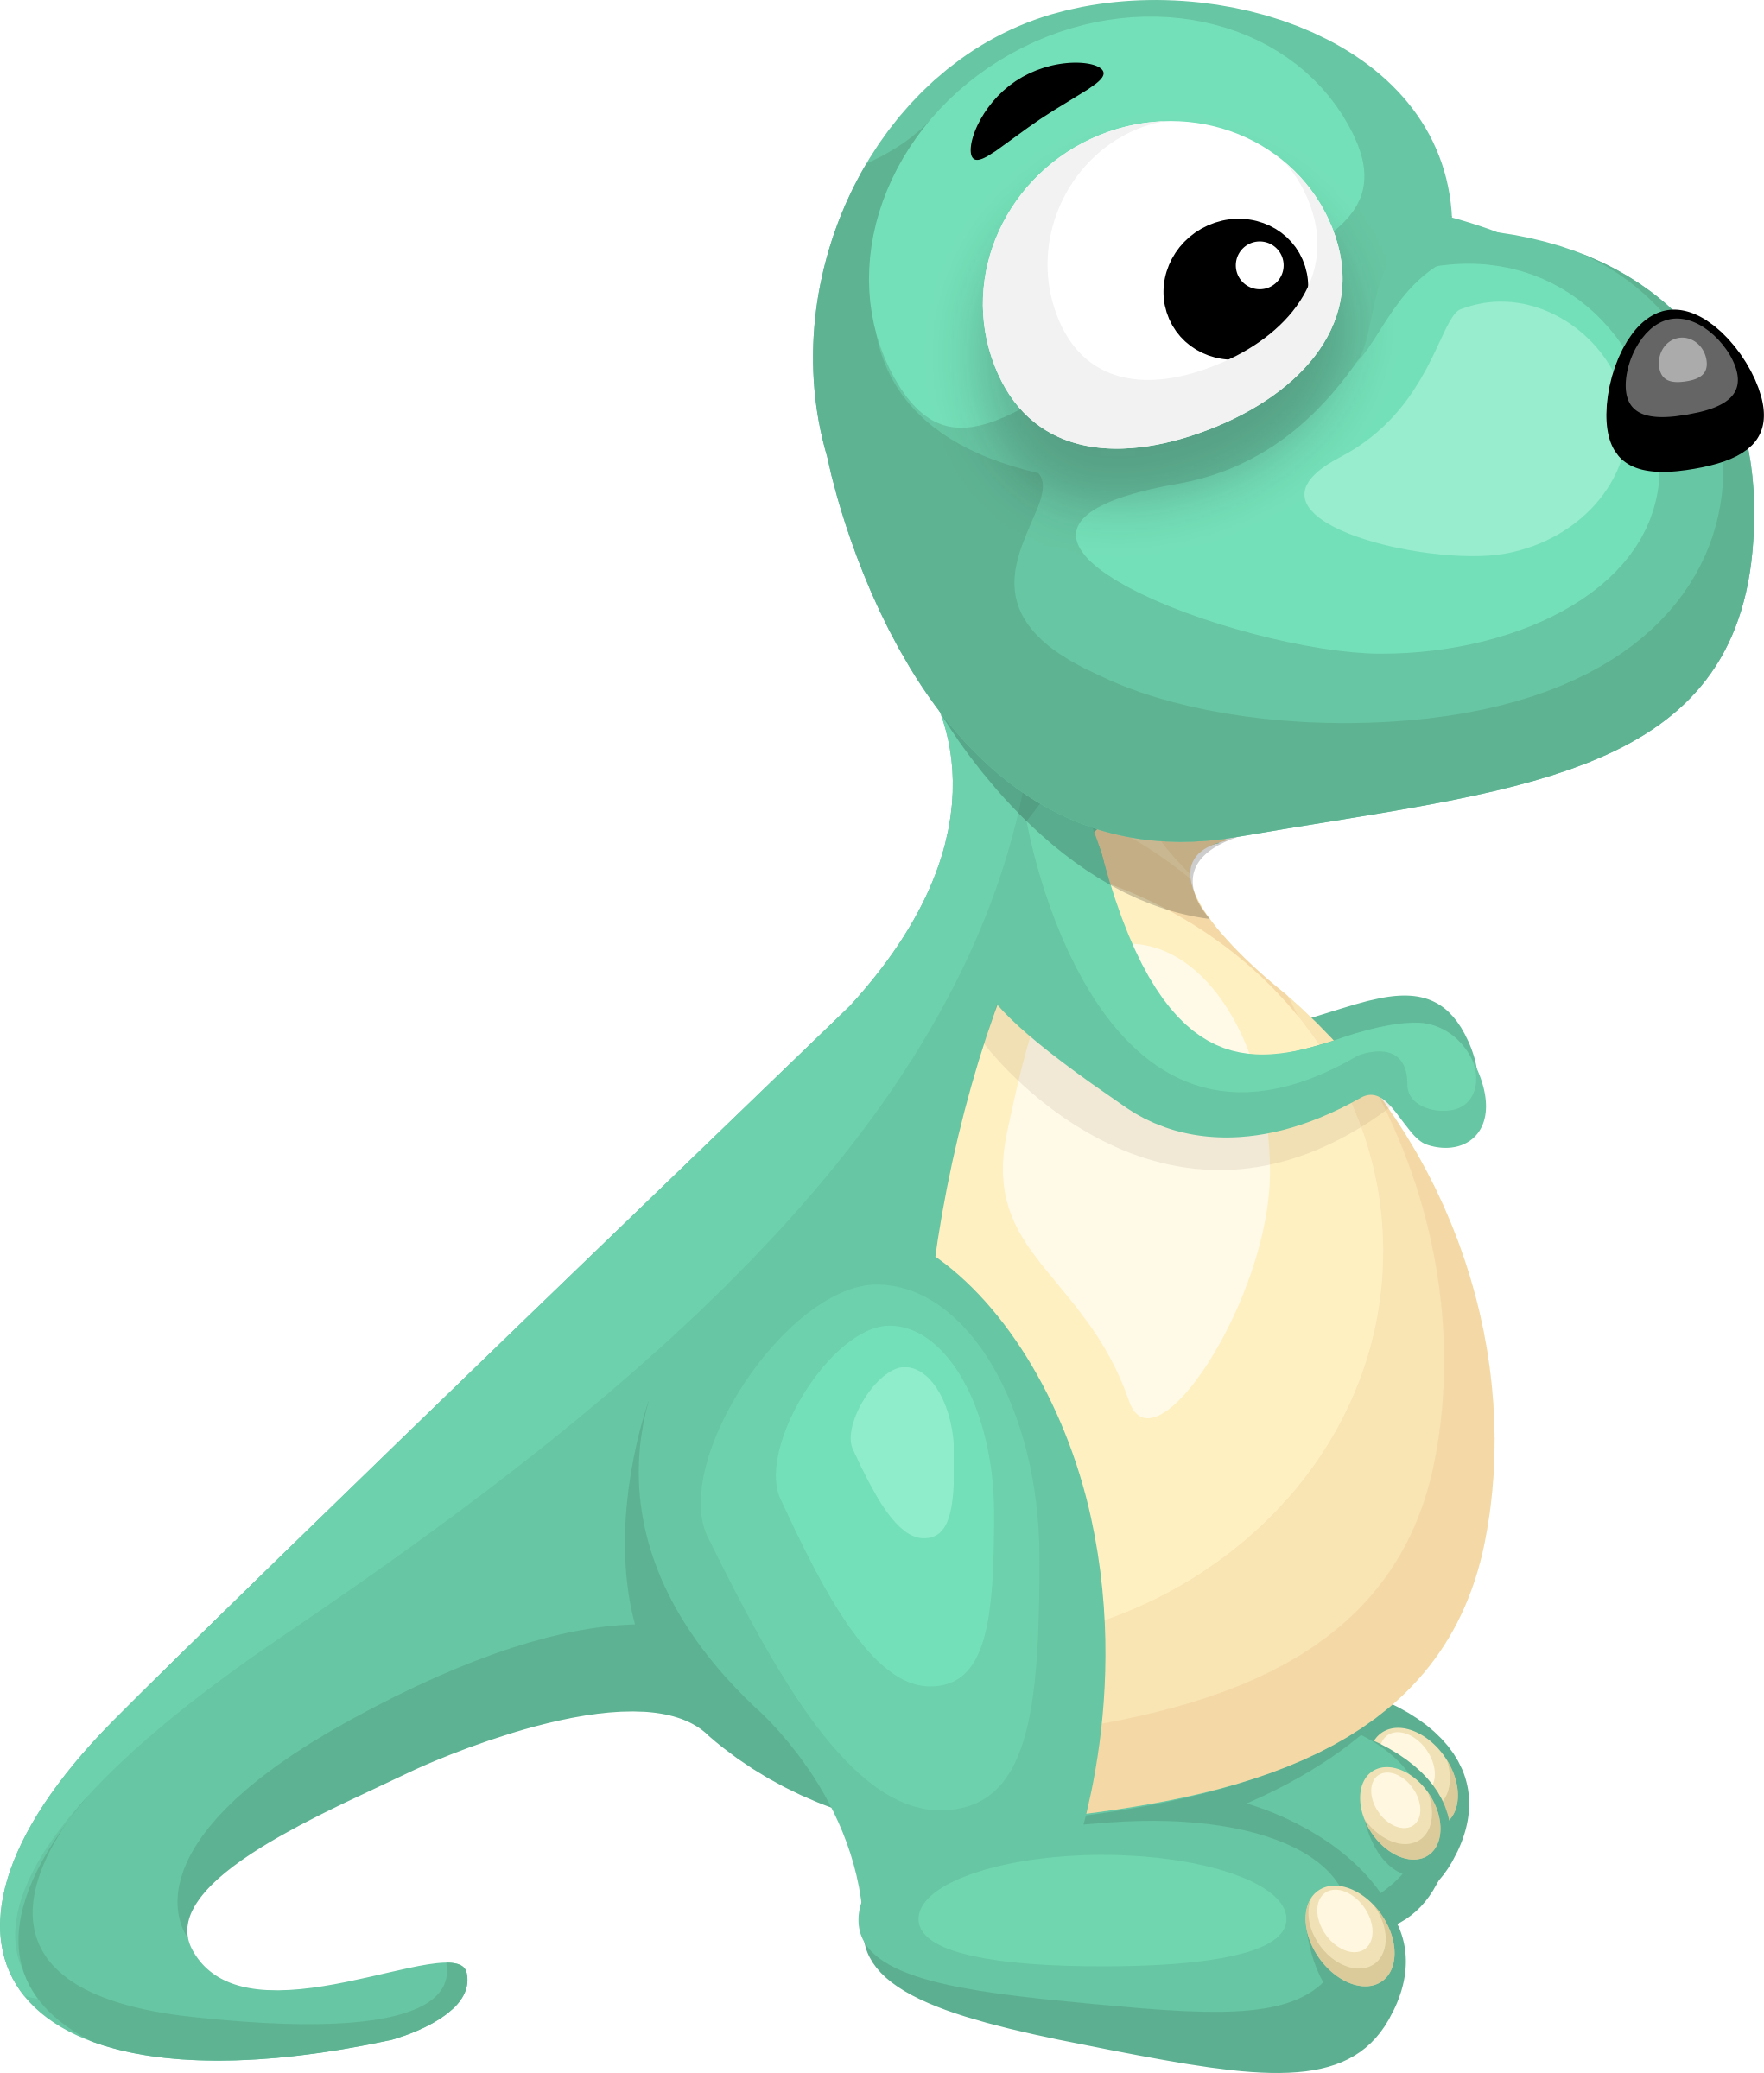 Turquoise Dinosaur Vector Clipart image - Free stock photo ...